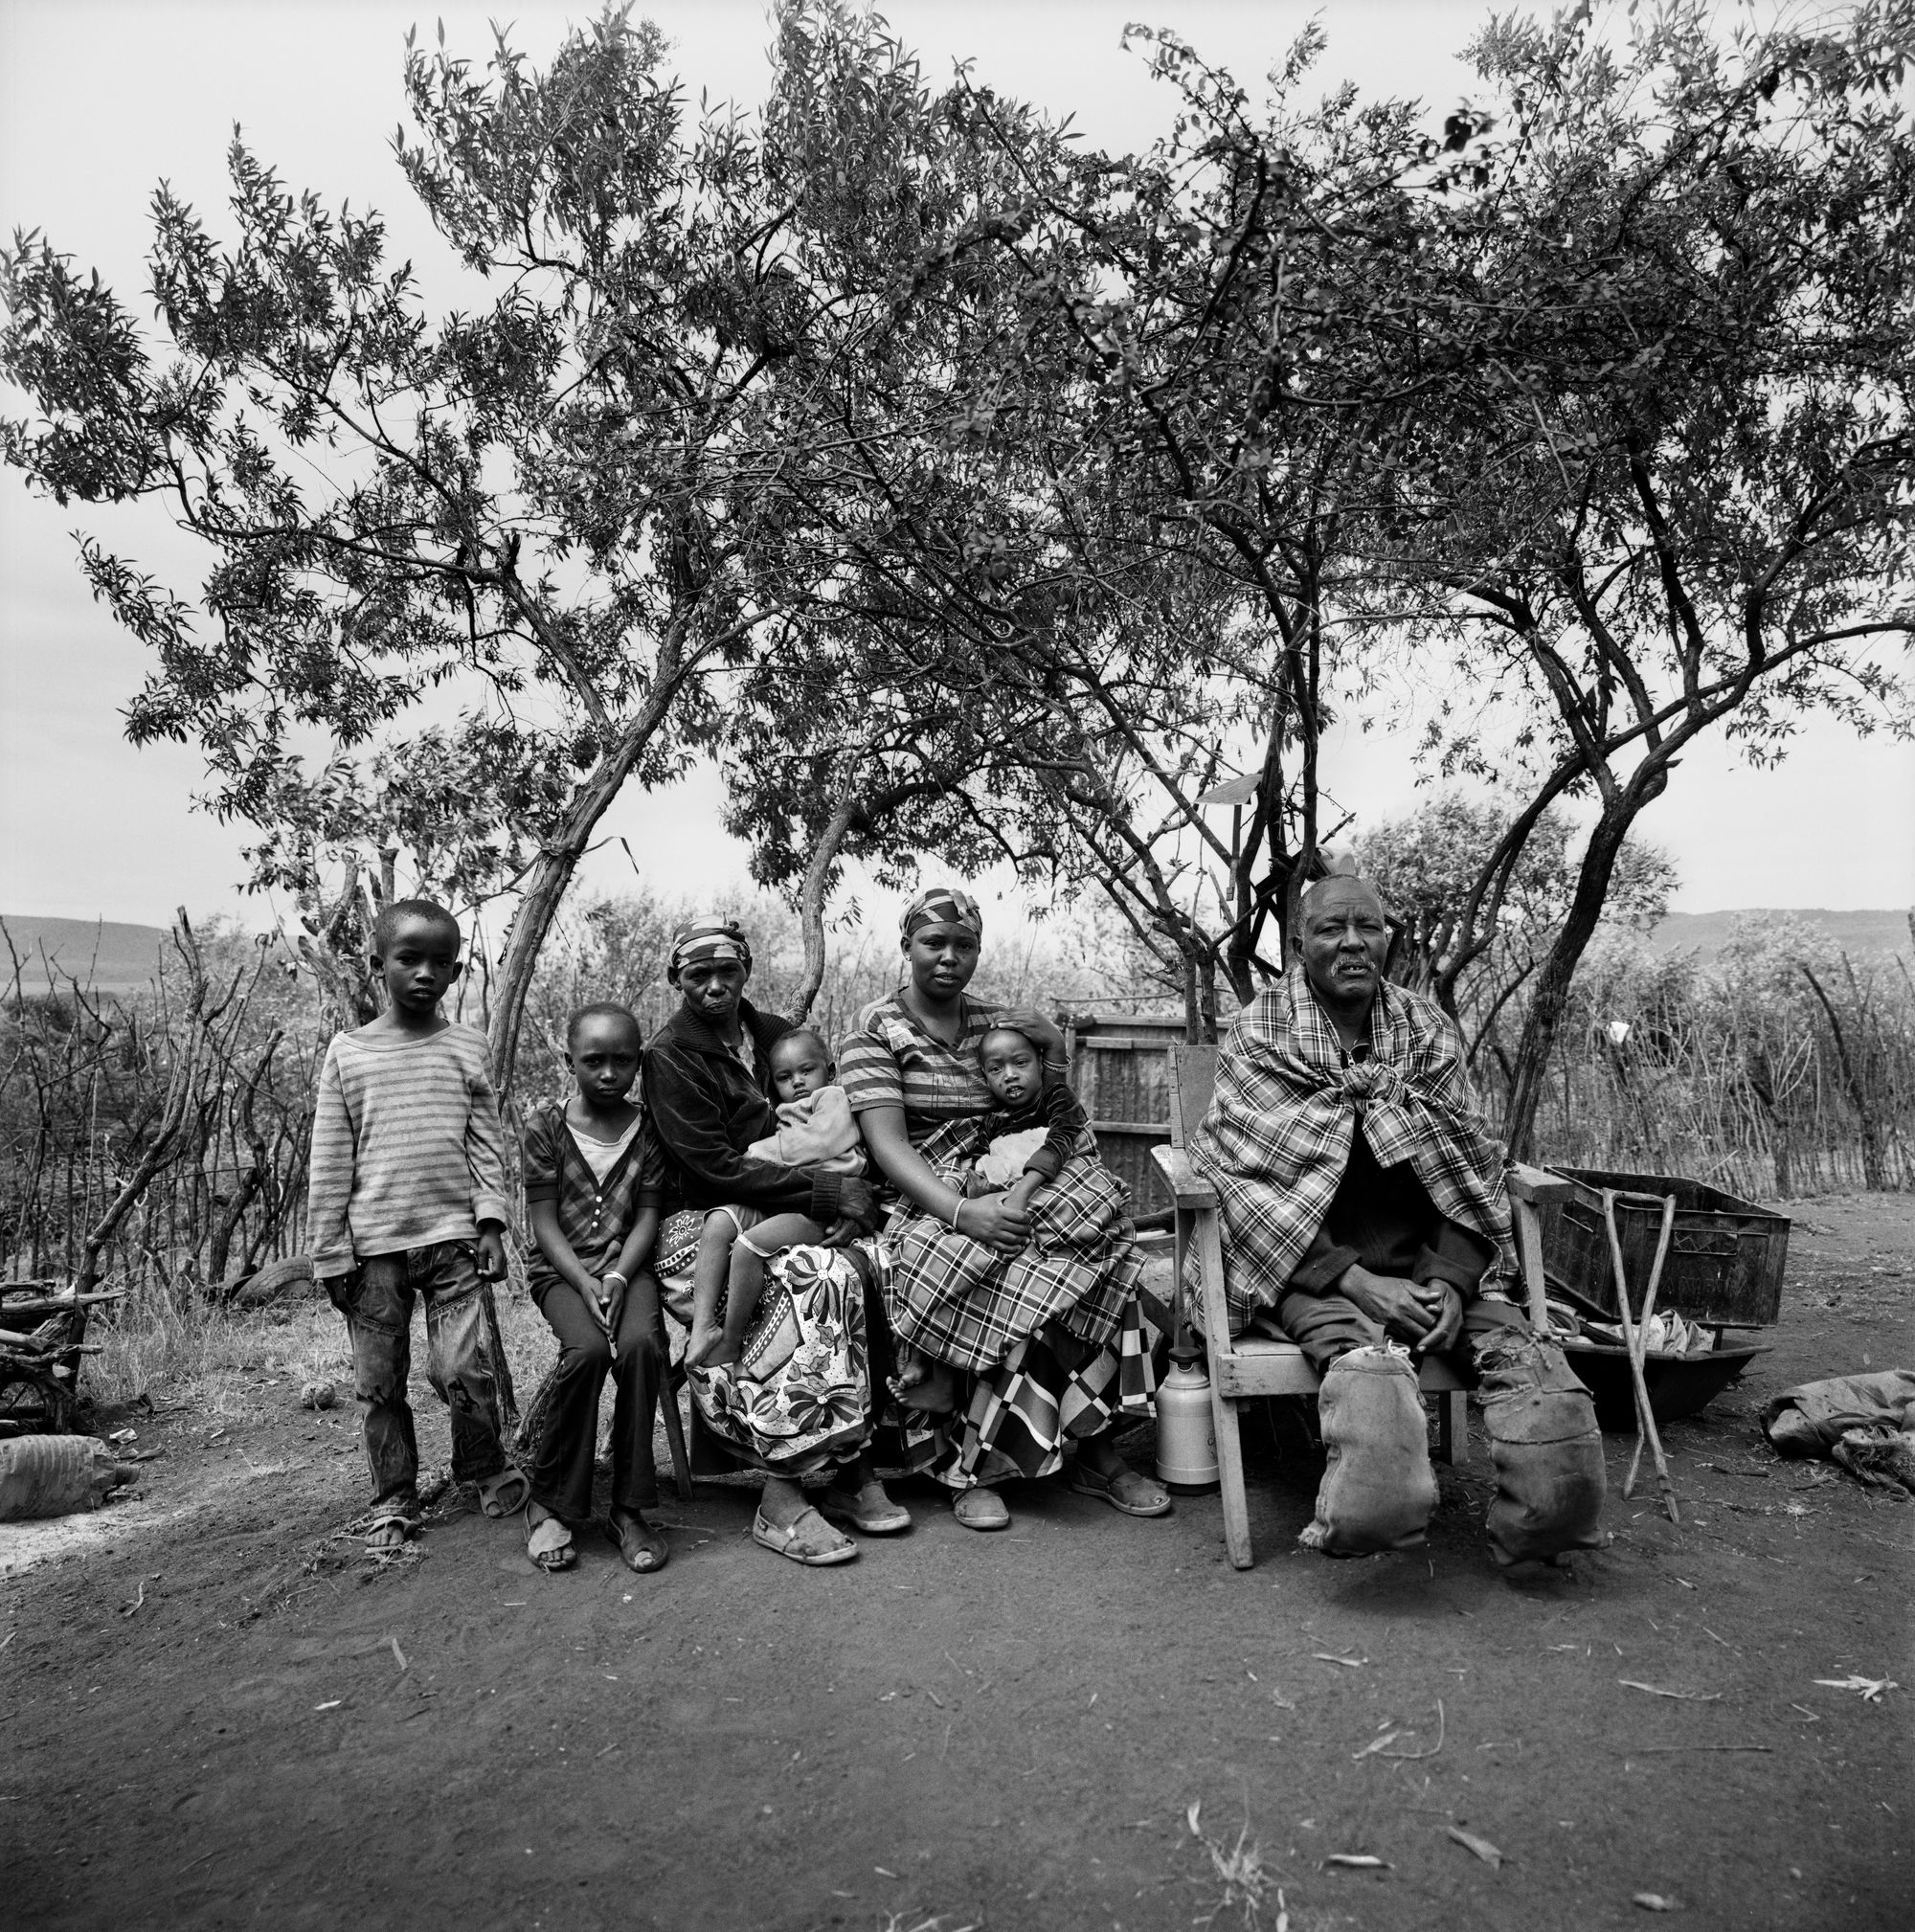 Black and white photo of a family group, of a man, two women, and four children. The man appears oldest, in a situation of importance on the wooden chair, legs amputated at the feet. Next to him the two women each with a child on their lap, and two older children next to them. Behind them sparse trees, a wooden fence, and hills in the horizon.